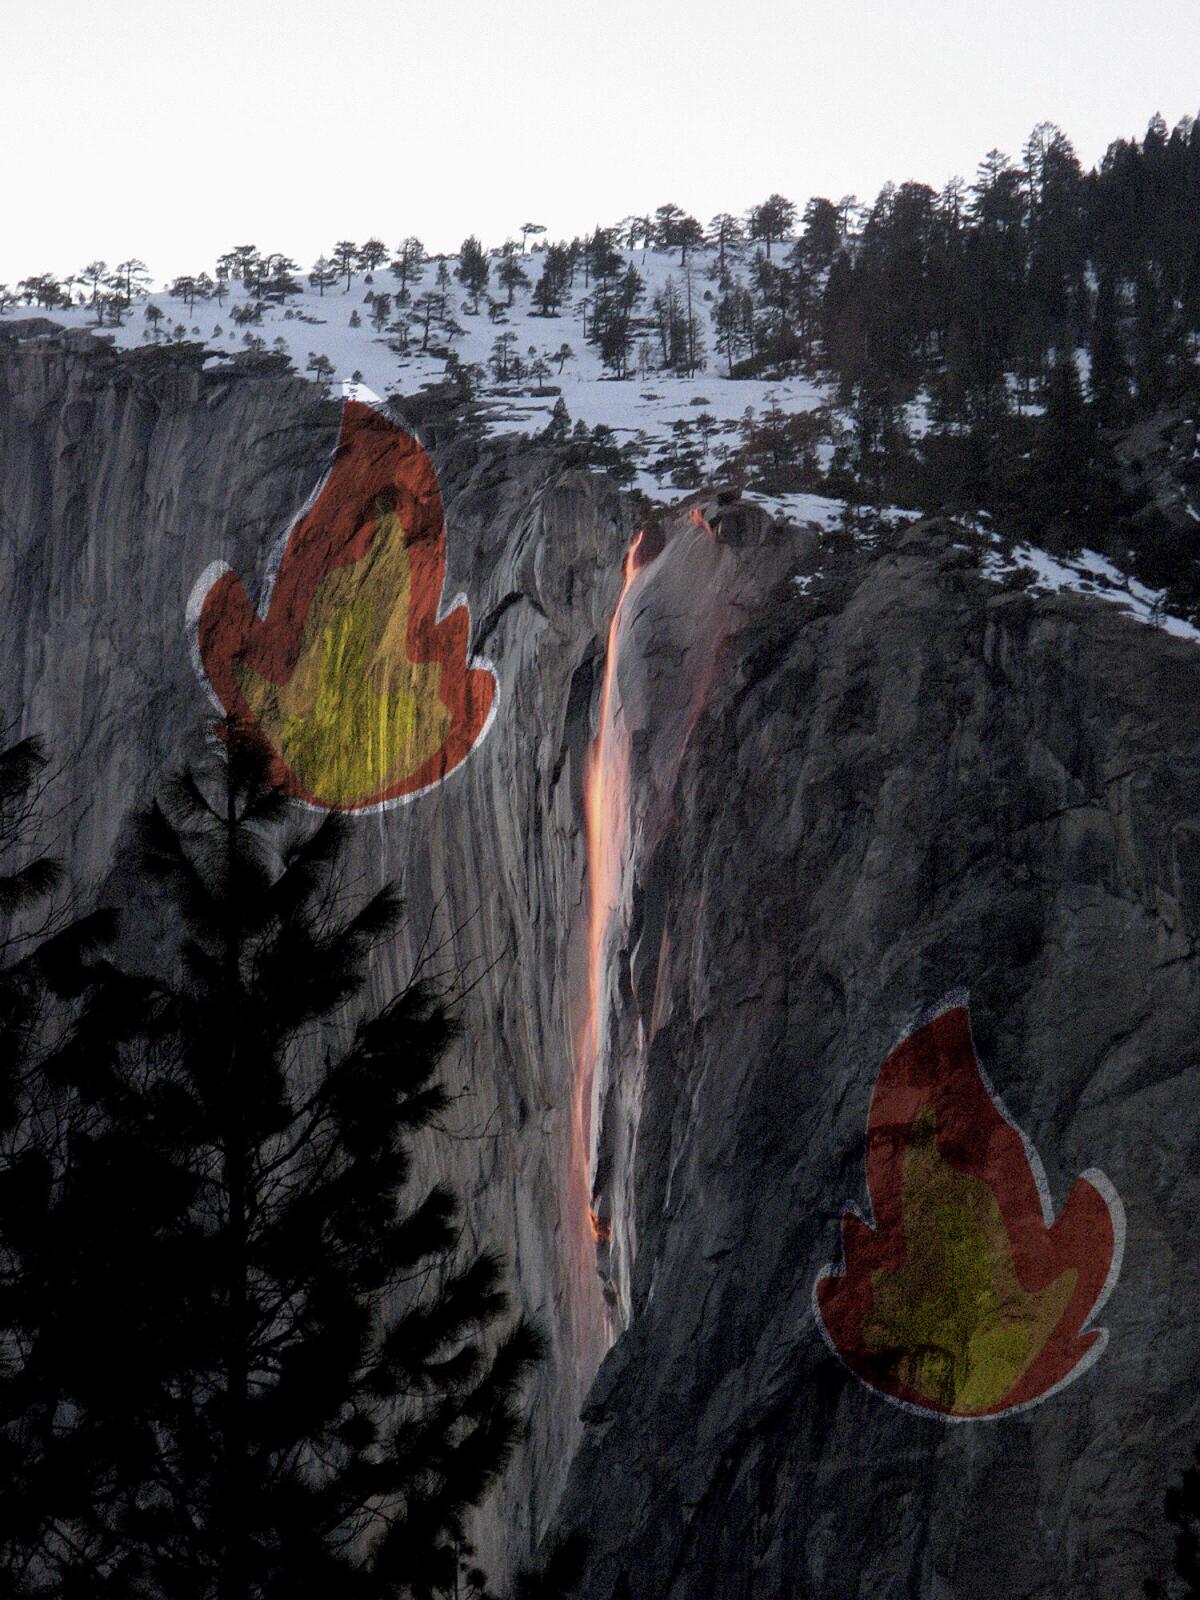 The natural firefall in Yosemite National Park.